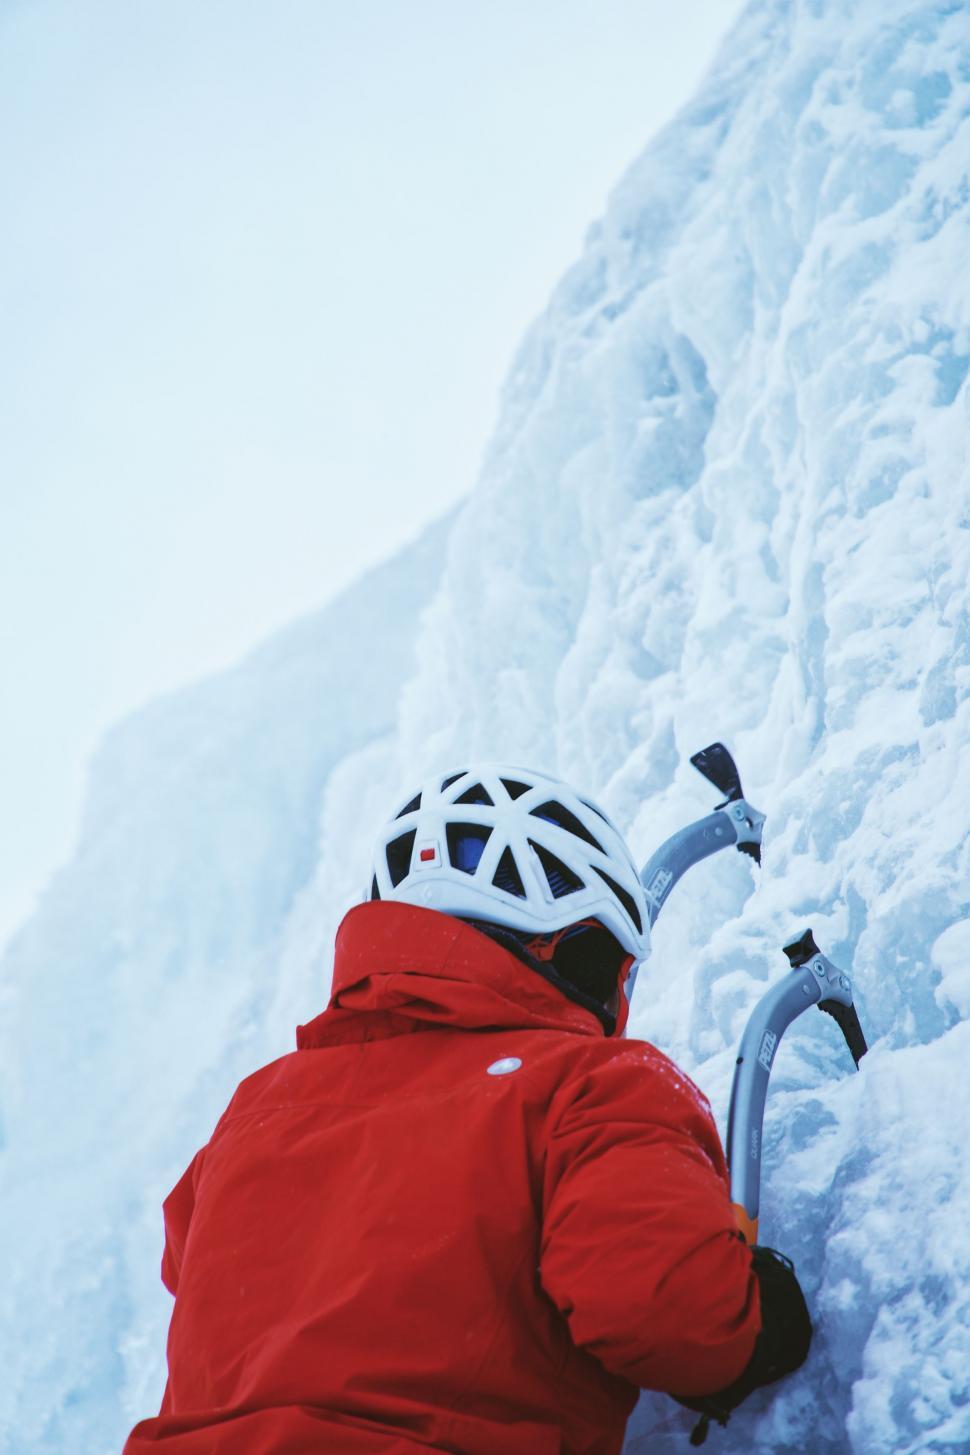 Free Image of Person Climbing Red Jacket Snowy Mountain 